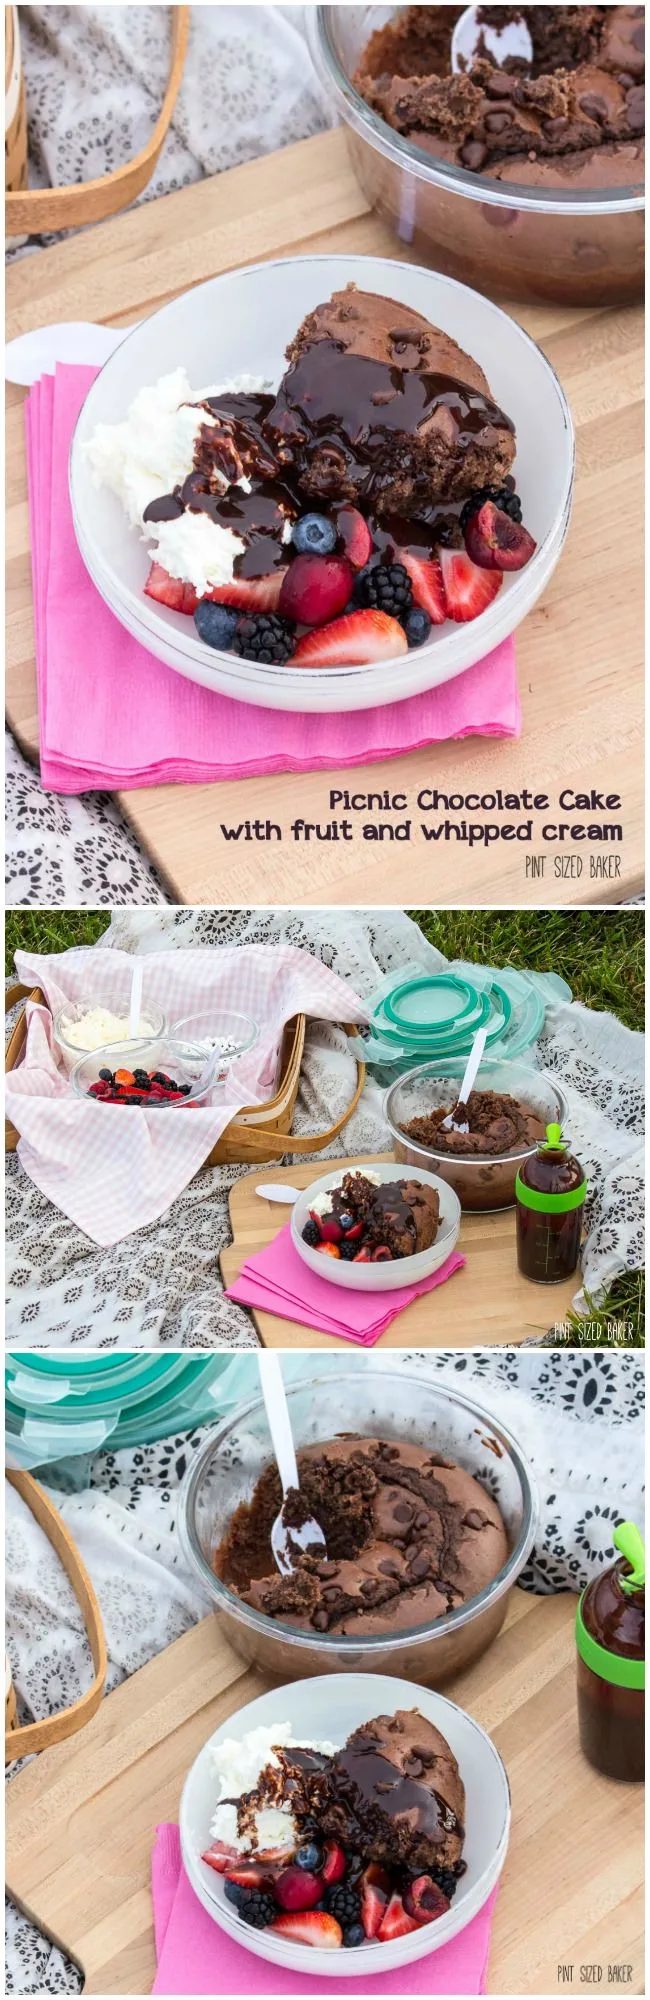 This Picnic Chocolate Cake is easy to make and is great when topped with fresh fruit and whipped cream. Make it for your next picnic.